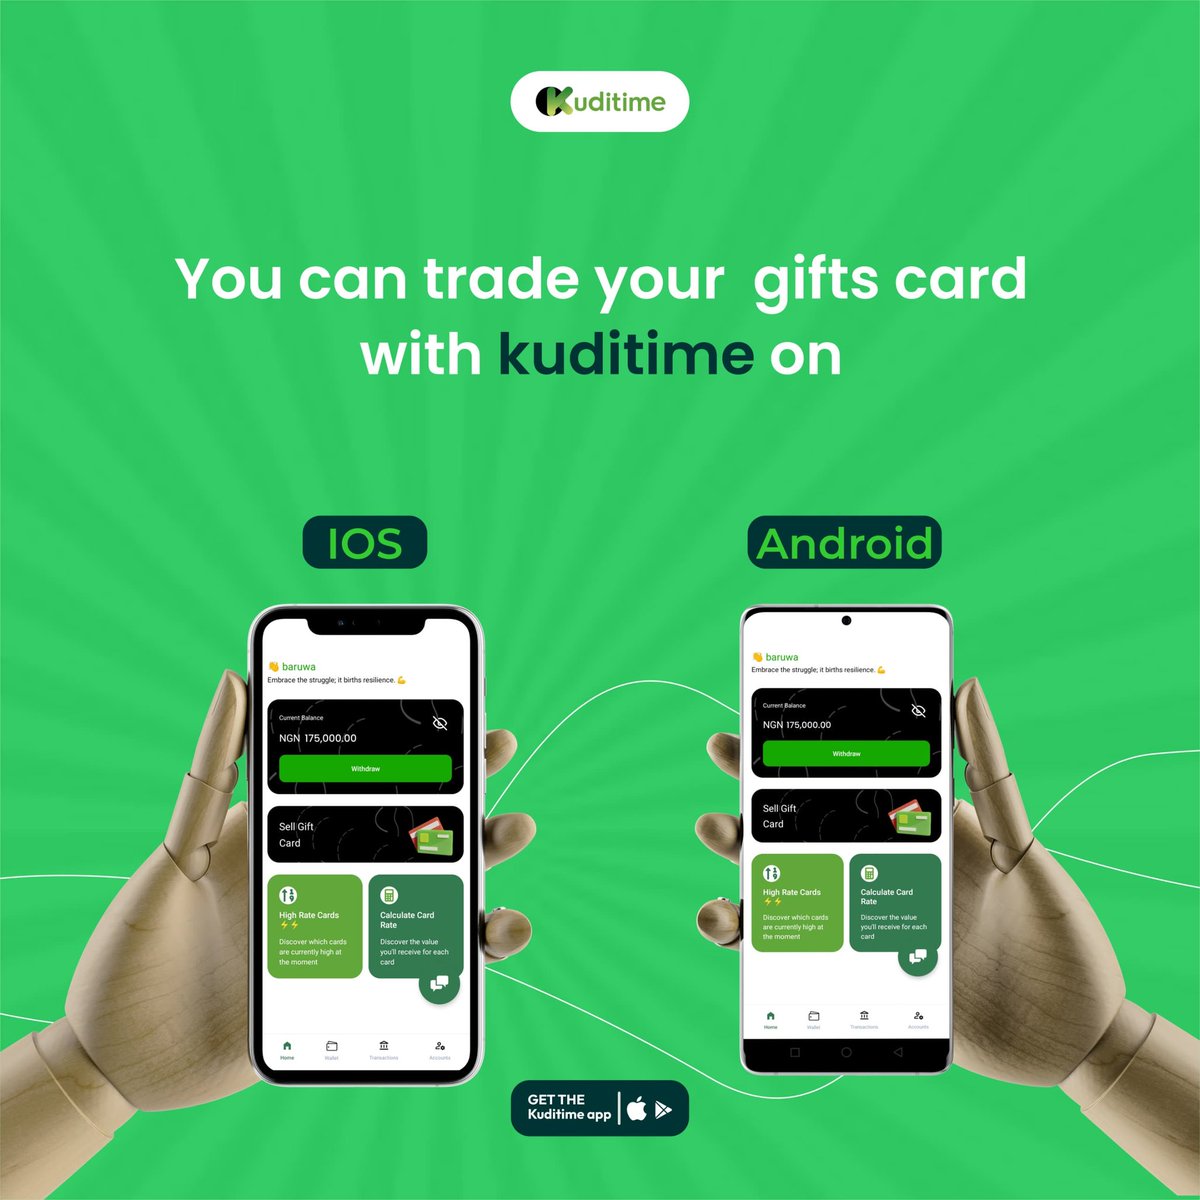 Hello! Kuditimers! 🤩🙌. Here's a reminder that you can trade with us on IOS or Android. The choice is your's to make!!!! 😍💯💯💯💚🤍
.
.
.
#gift #giftcards #cards #amazon #amazongiftcard #sephoria #applegiftcard #xbox #steam #razergold #cards #itunesgiftcard